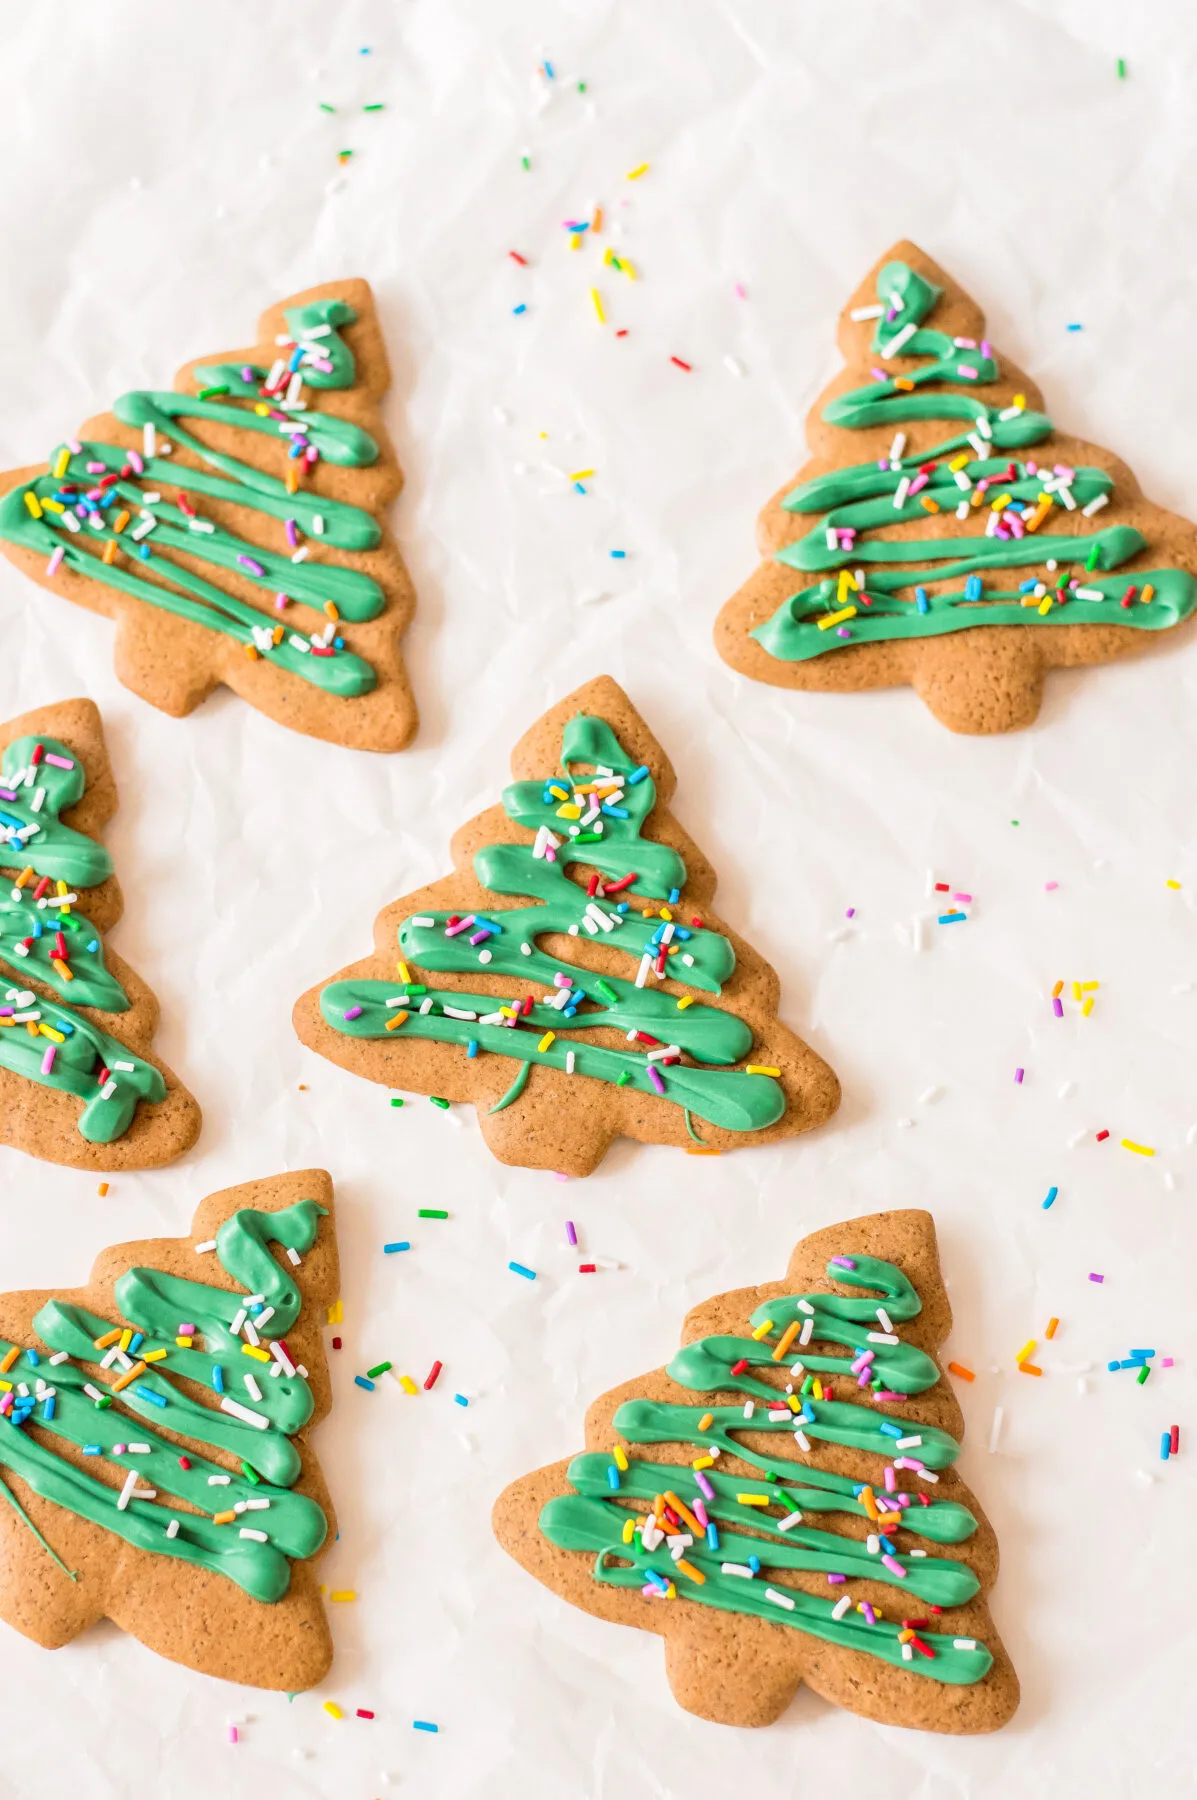 These gingerbread Christmas tree cookies are fun to make with your family. They're festive, delicious, and perfect for any holiday party!